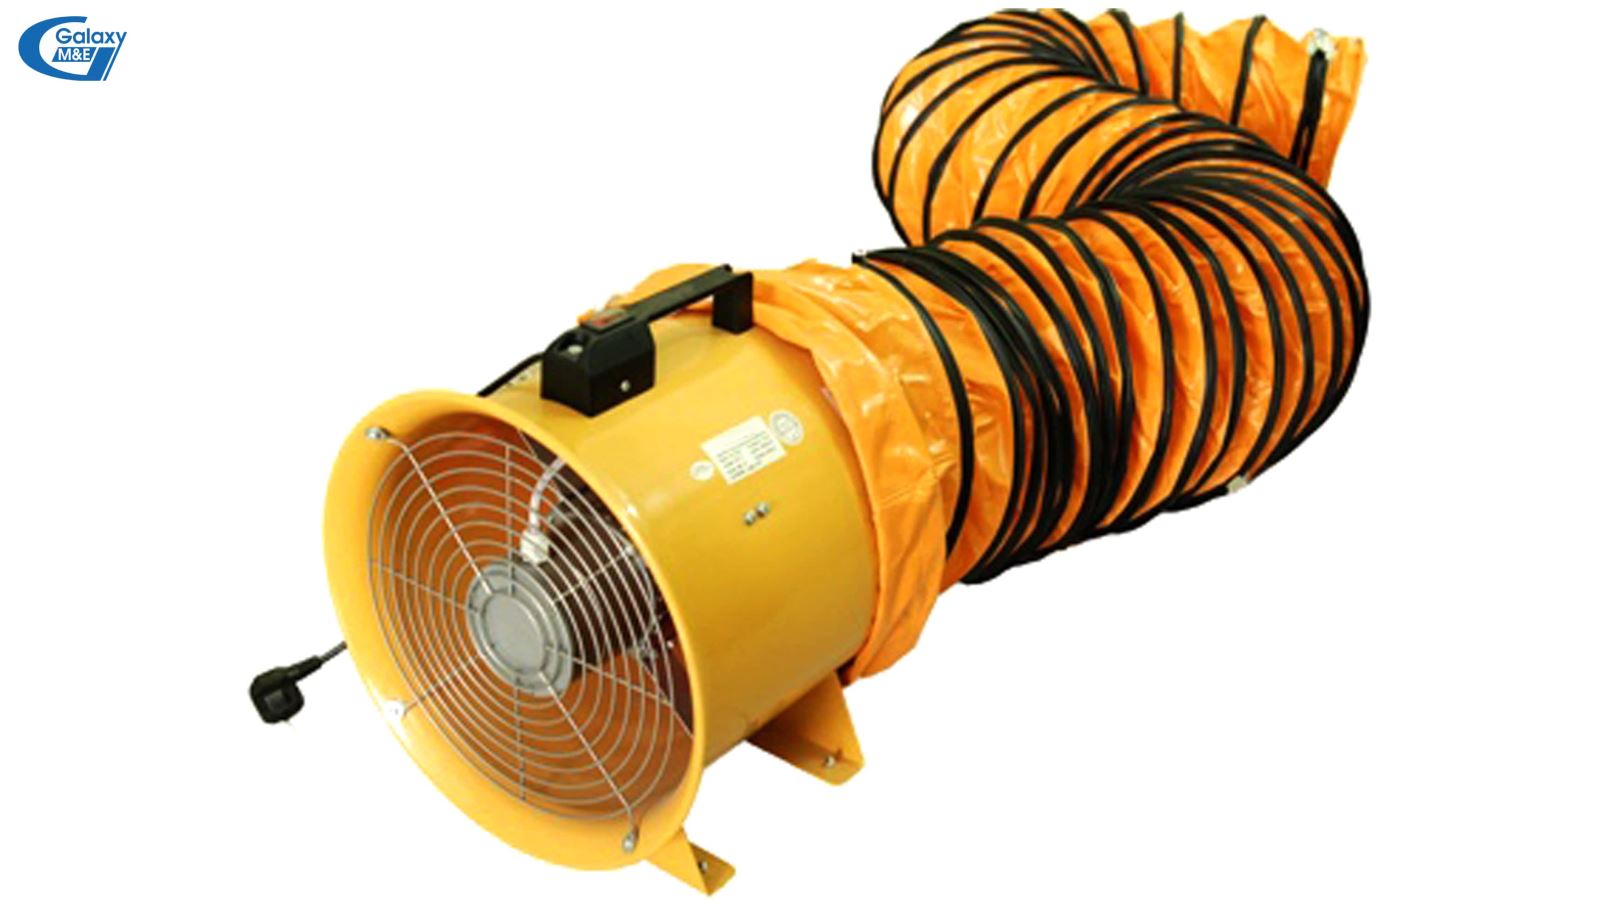 Tubular axial fans are often used to ventilate coal mines, and traffic tunnels.